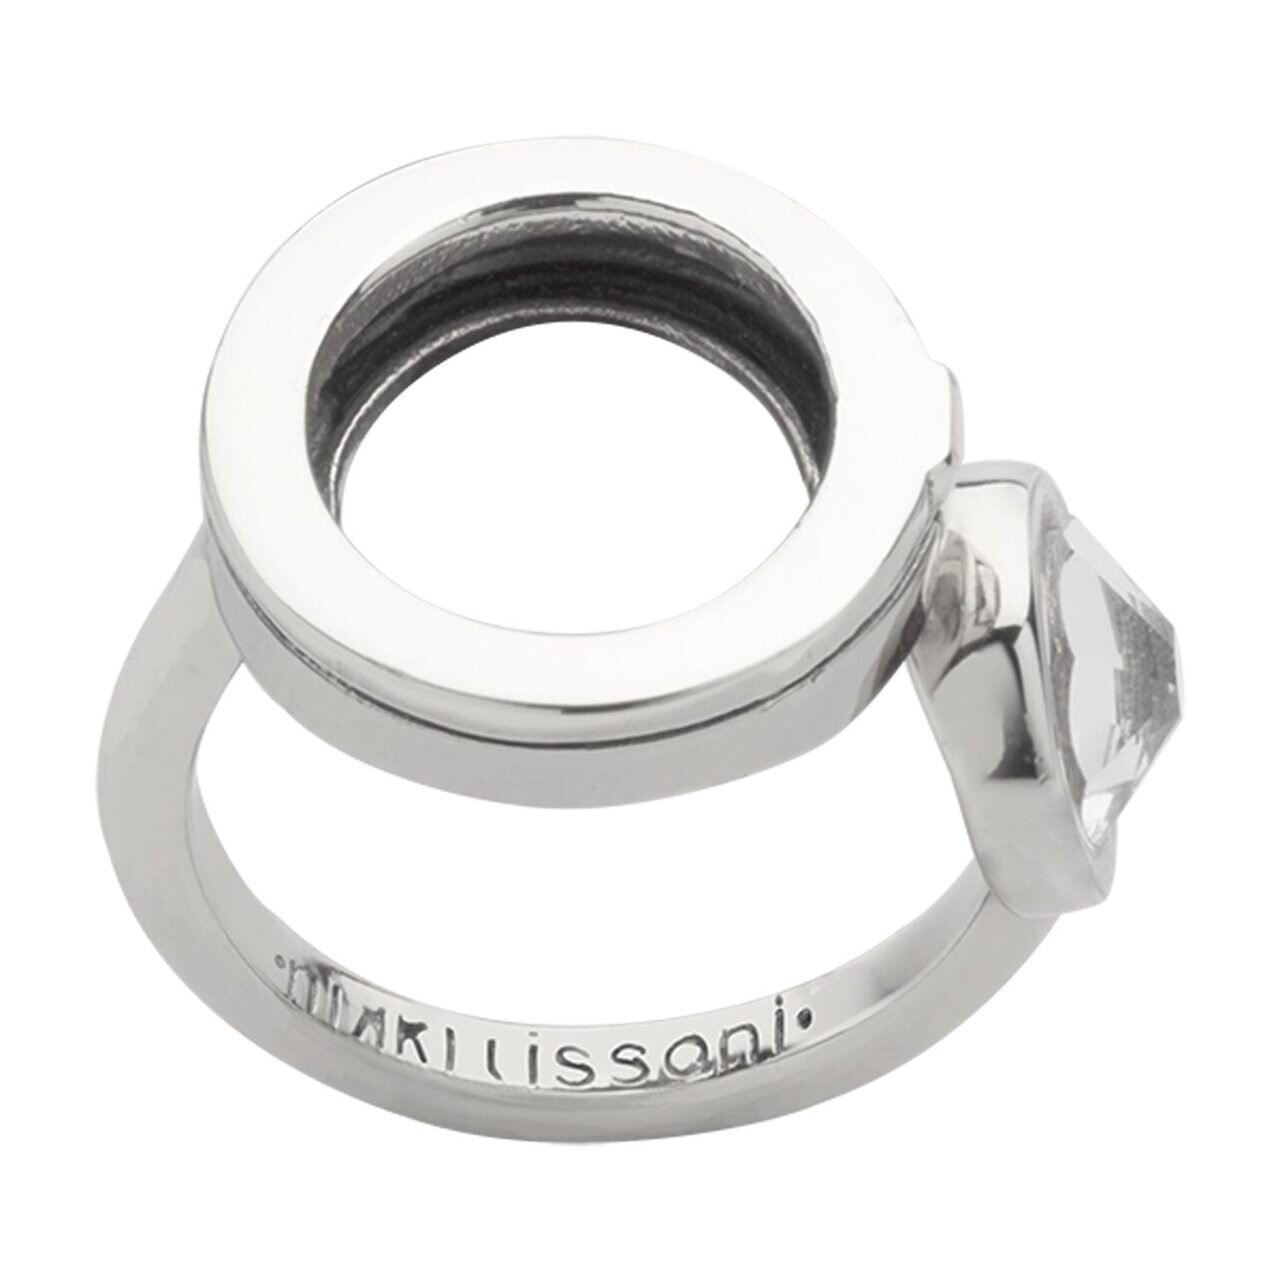 Nikki Lissoni Interchangeable Open Ring with Swarovski Stone Silver-plated Size 9 R1007S9